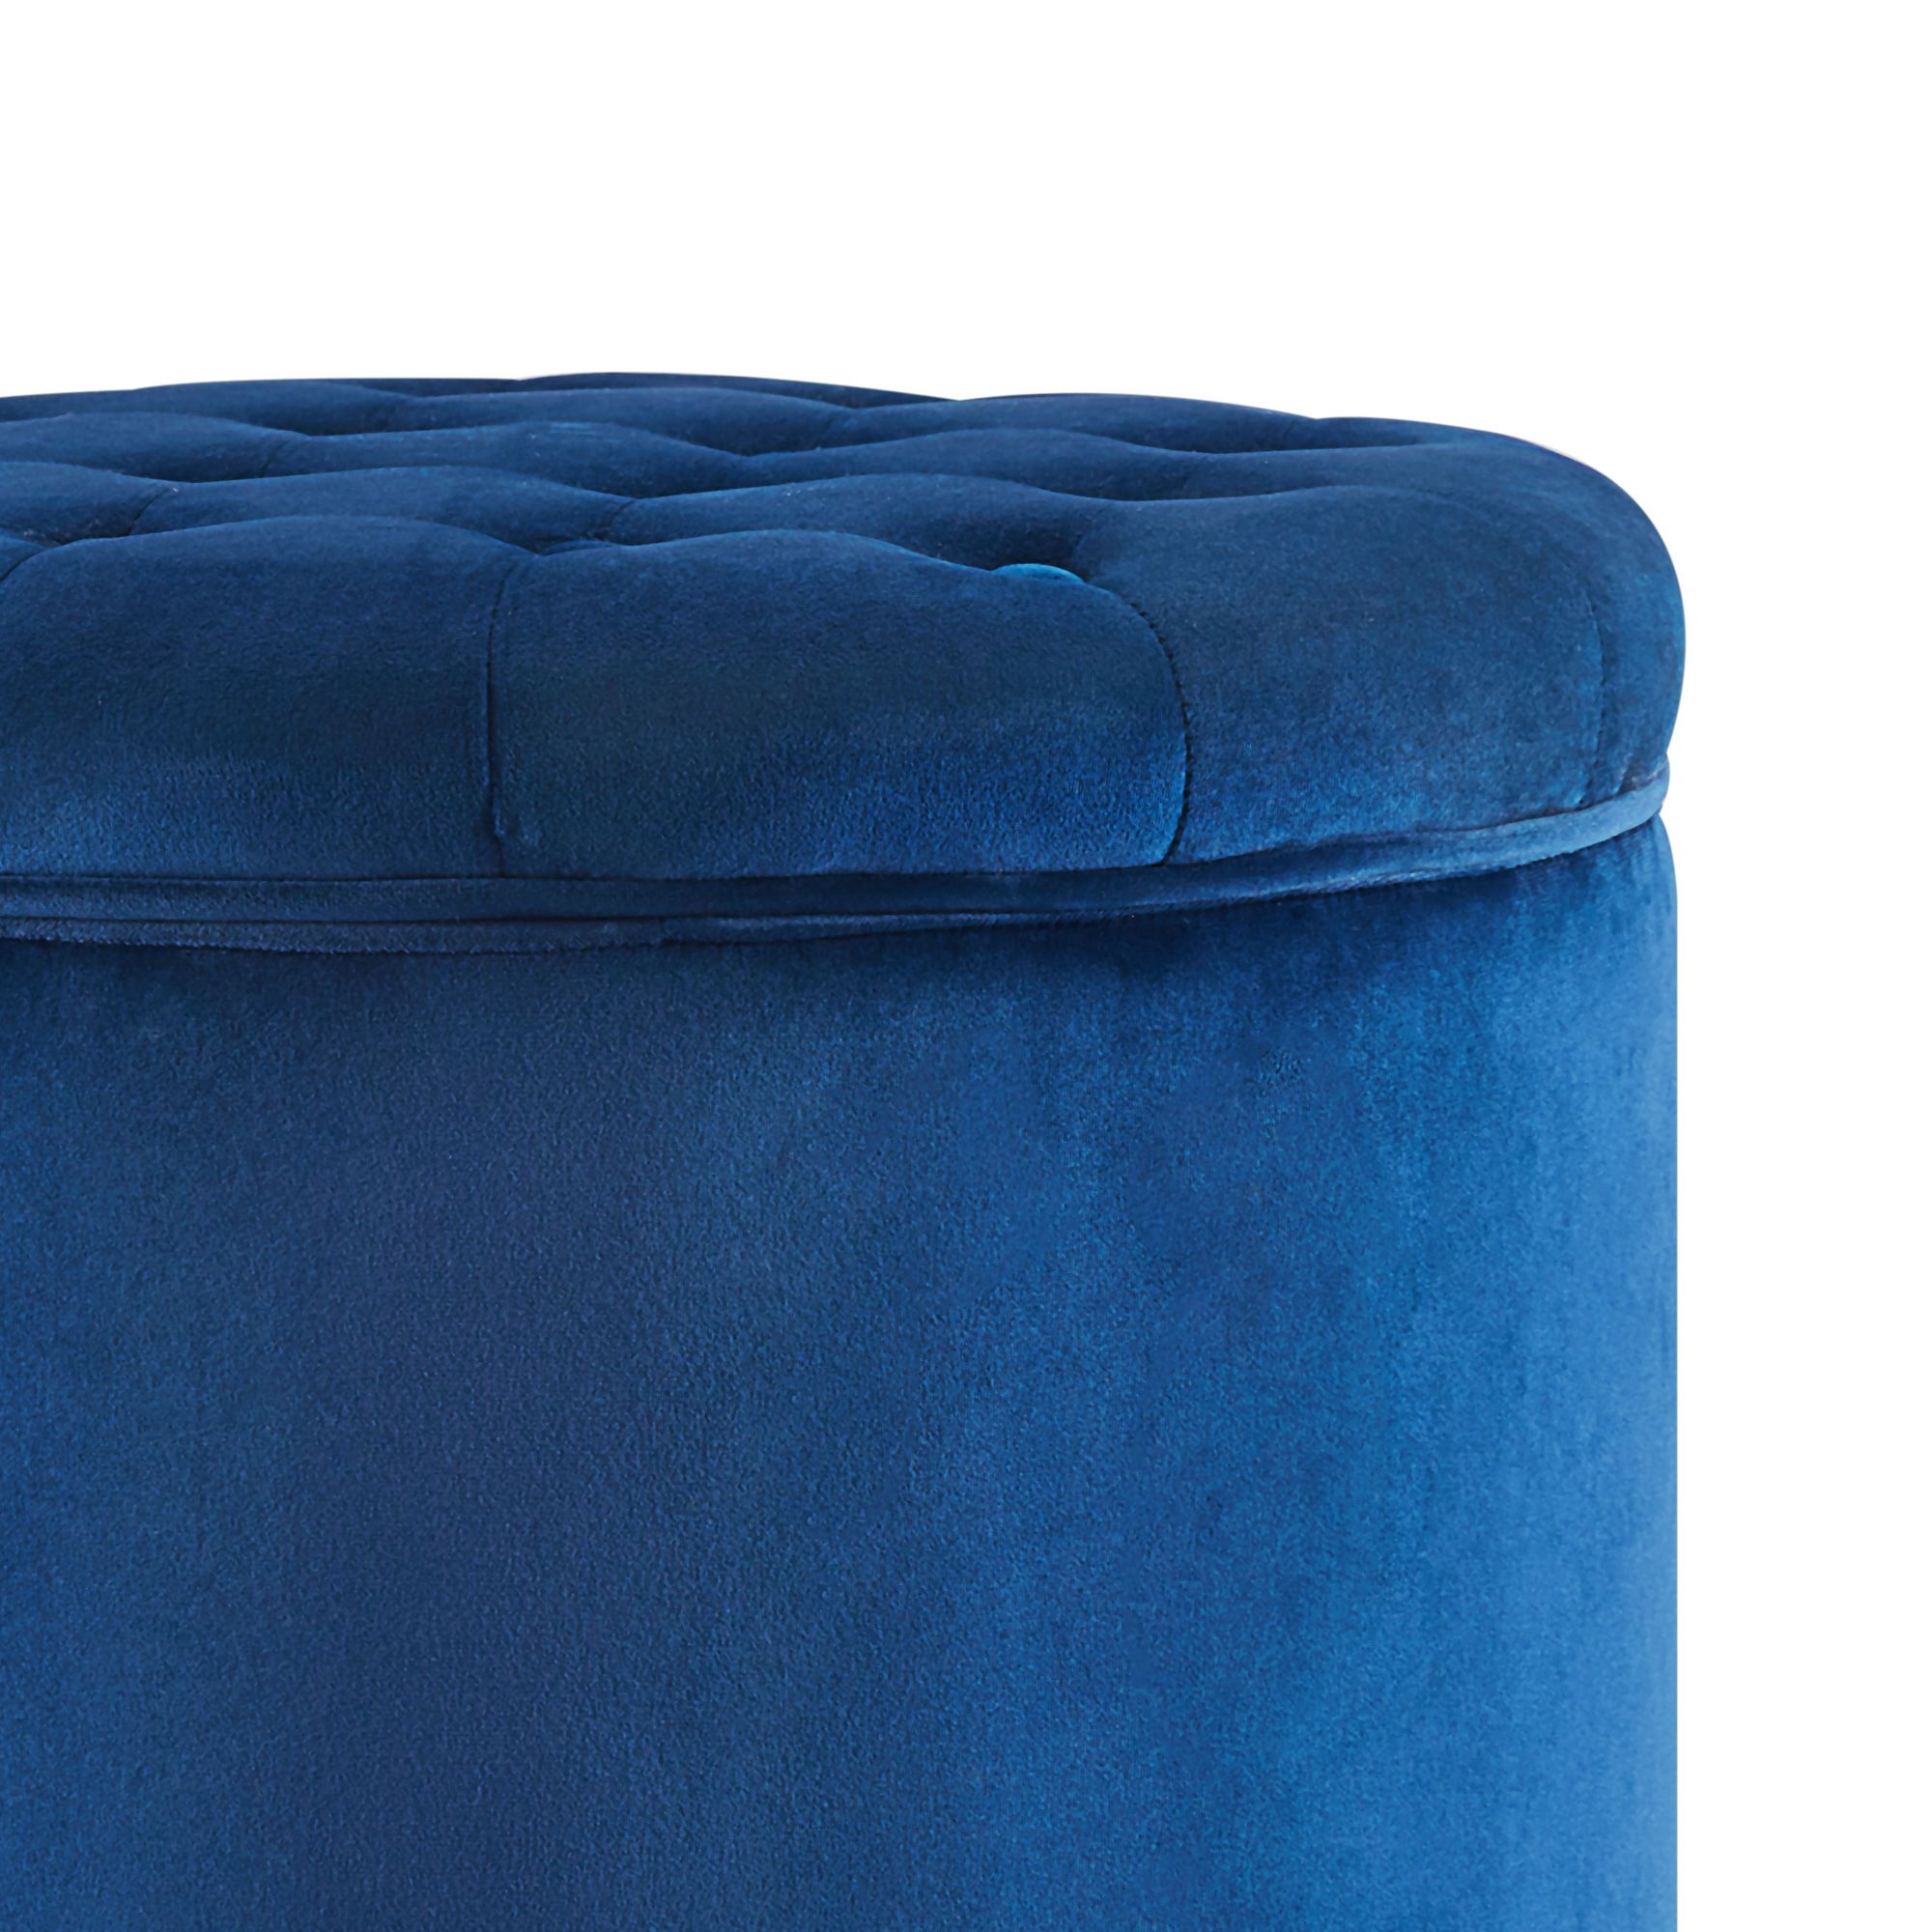 Elegant Linen/ Velvet Tufted Button Ottoman Round Footstool Coffee Intended For Gray Fabric Round Modern Ottomans With Rope Trim (View 6 of 20)